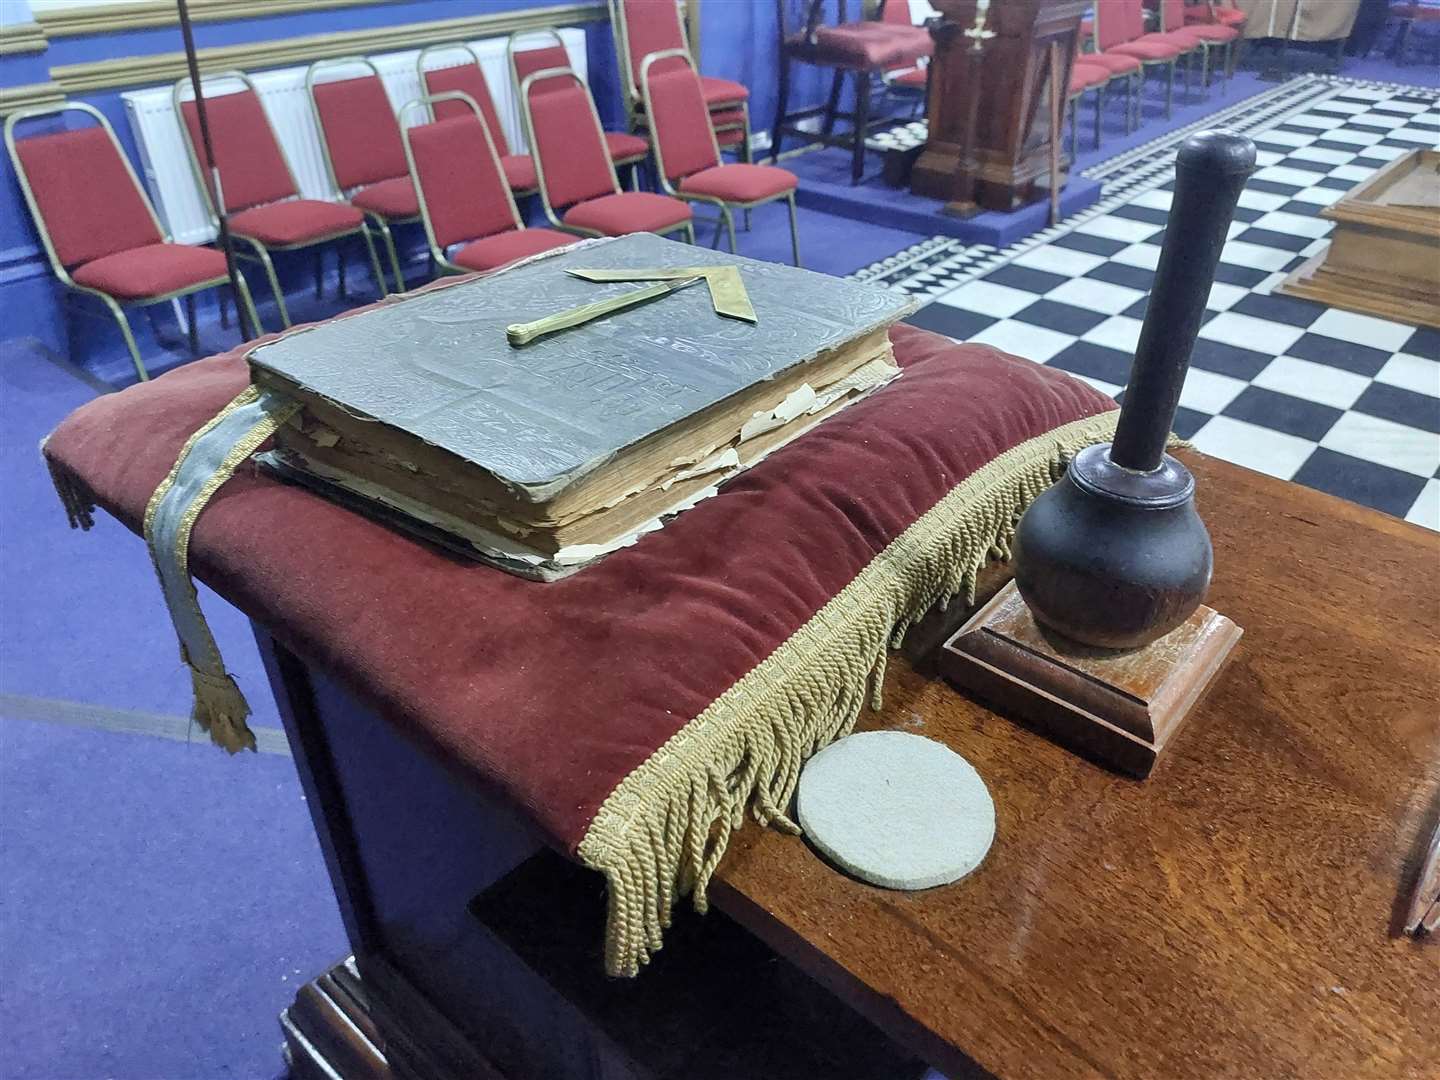 Masonic temples have been more open in recent years - but still retain an air of mystery